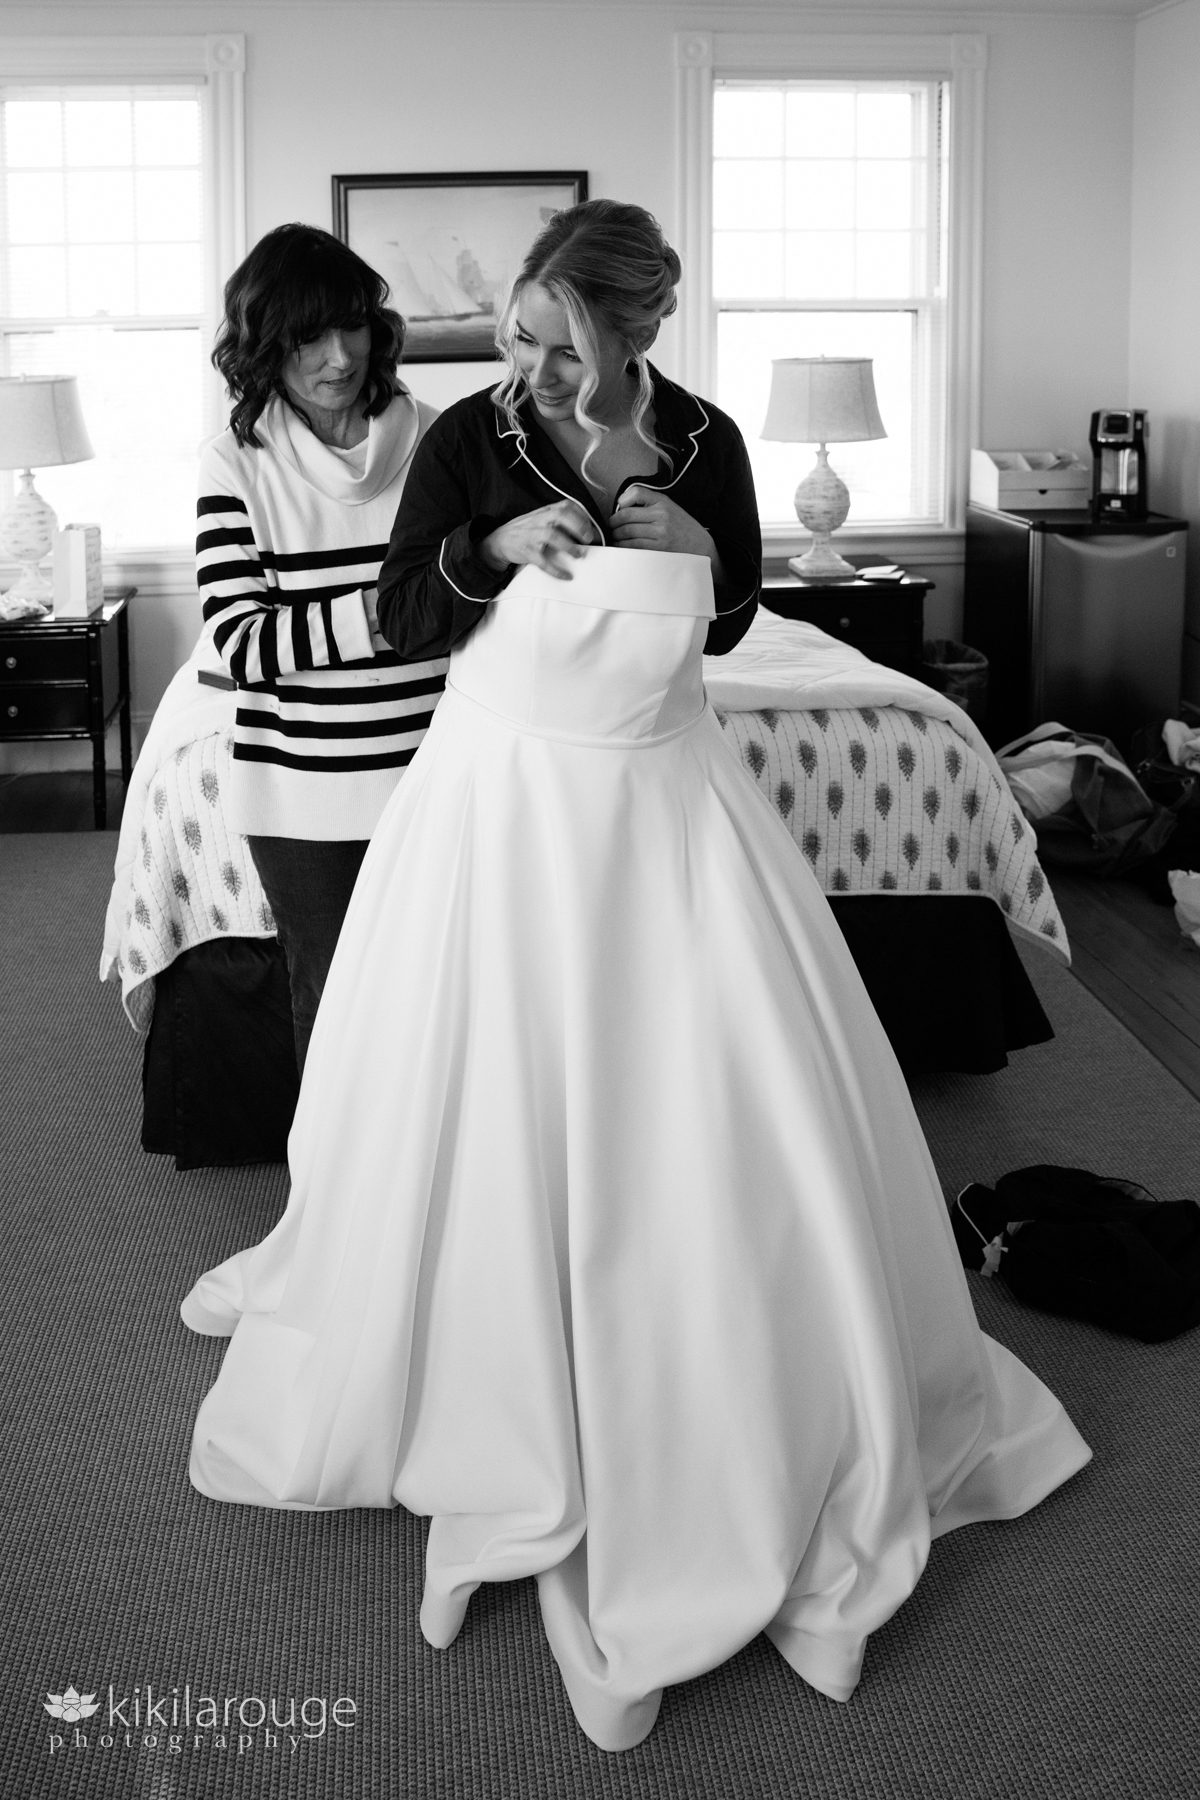 Mom in striped sweater helping her daughter out of PJs and into a bridal gown